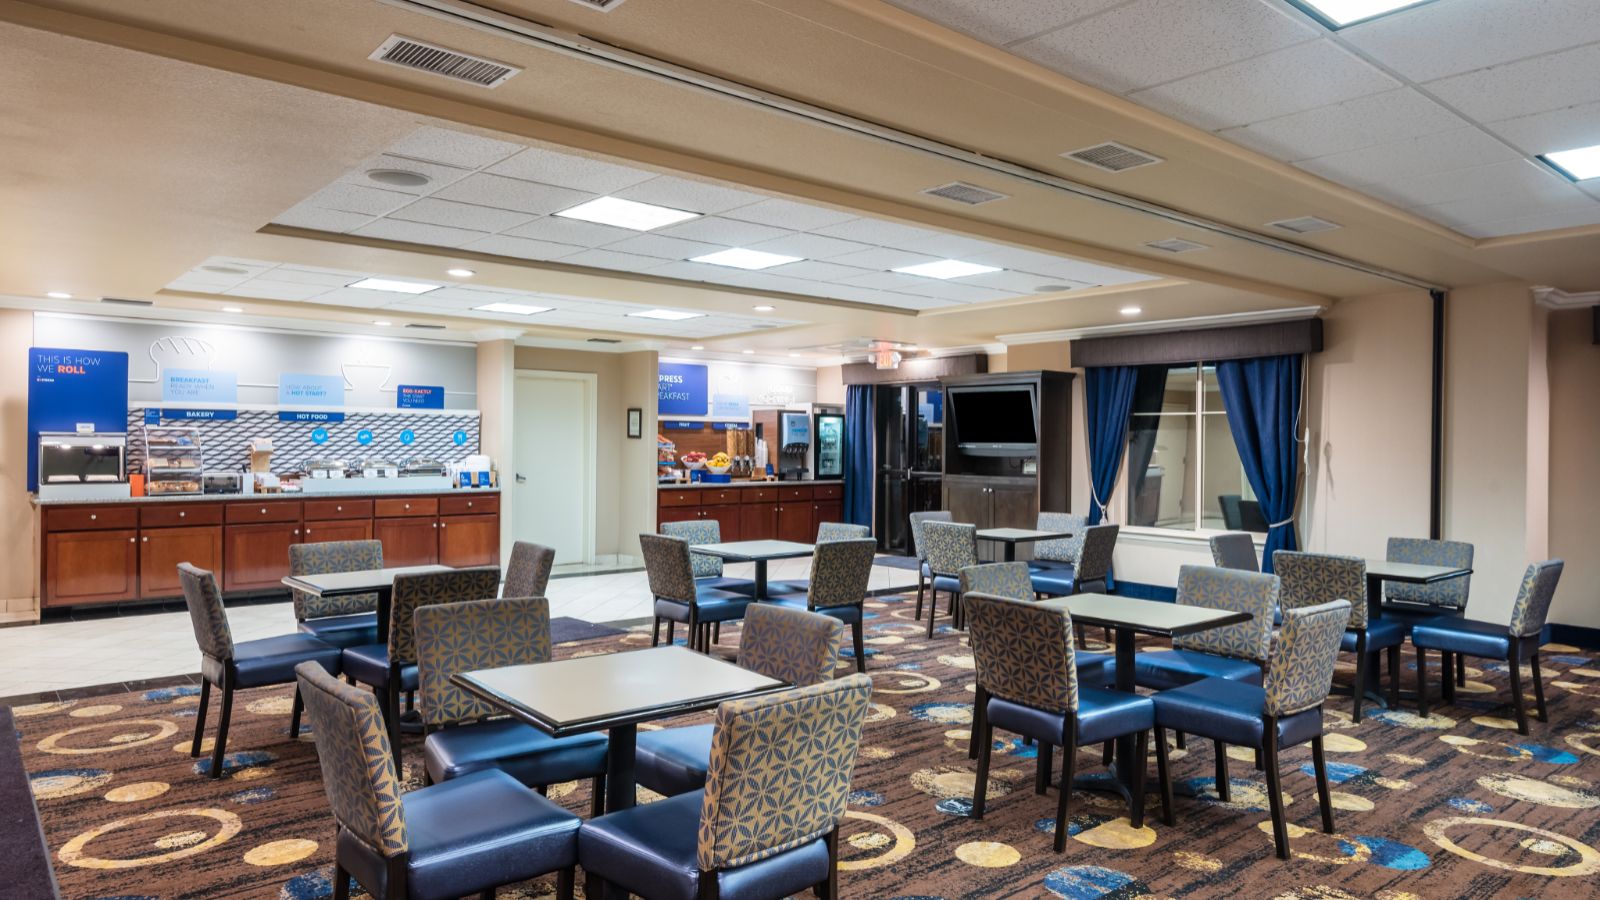 Lathrop CA Holiday Inn Express rooms and suites